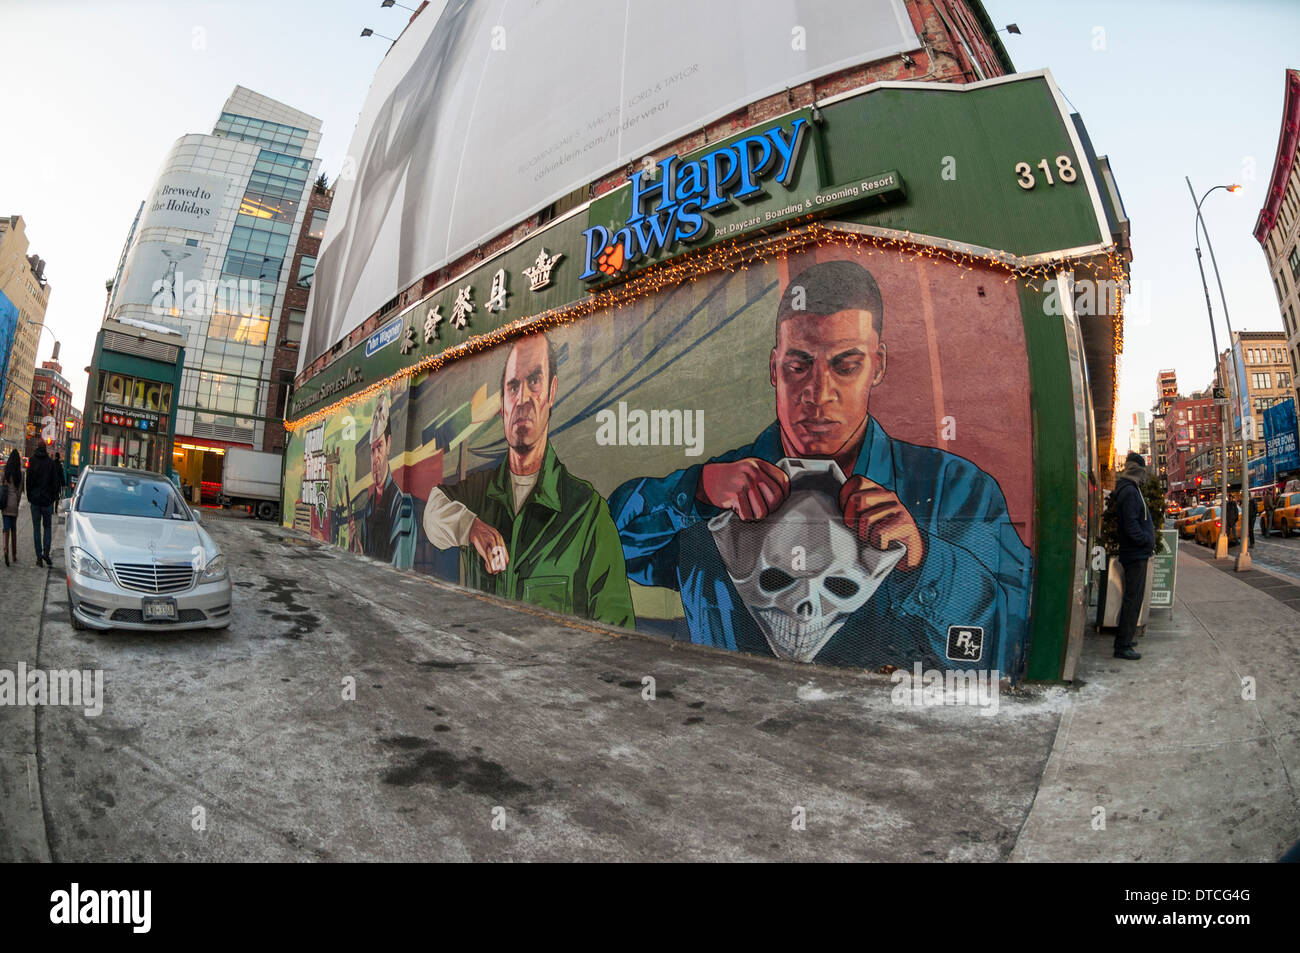 The facade of the Rockstar North building in Edinburgh, the company  Photo d'actualité - Getty Images